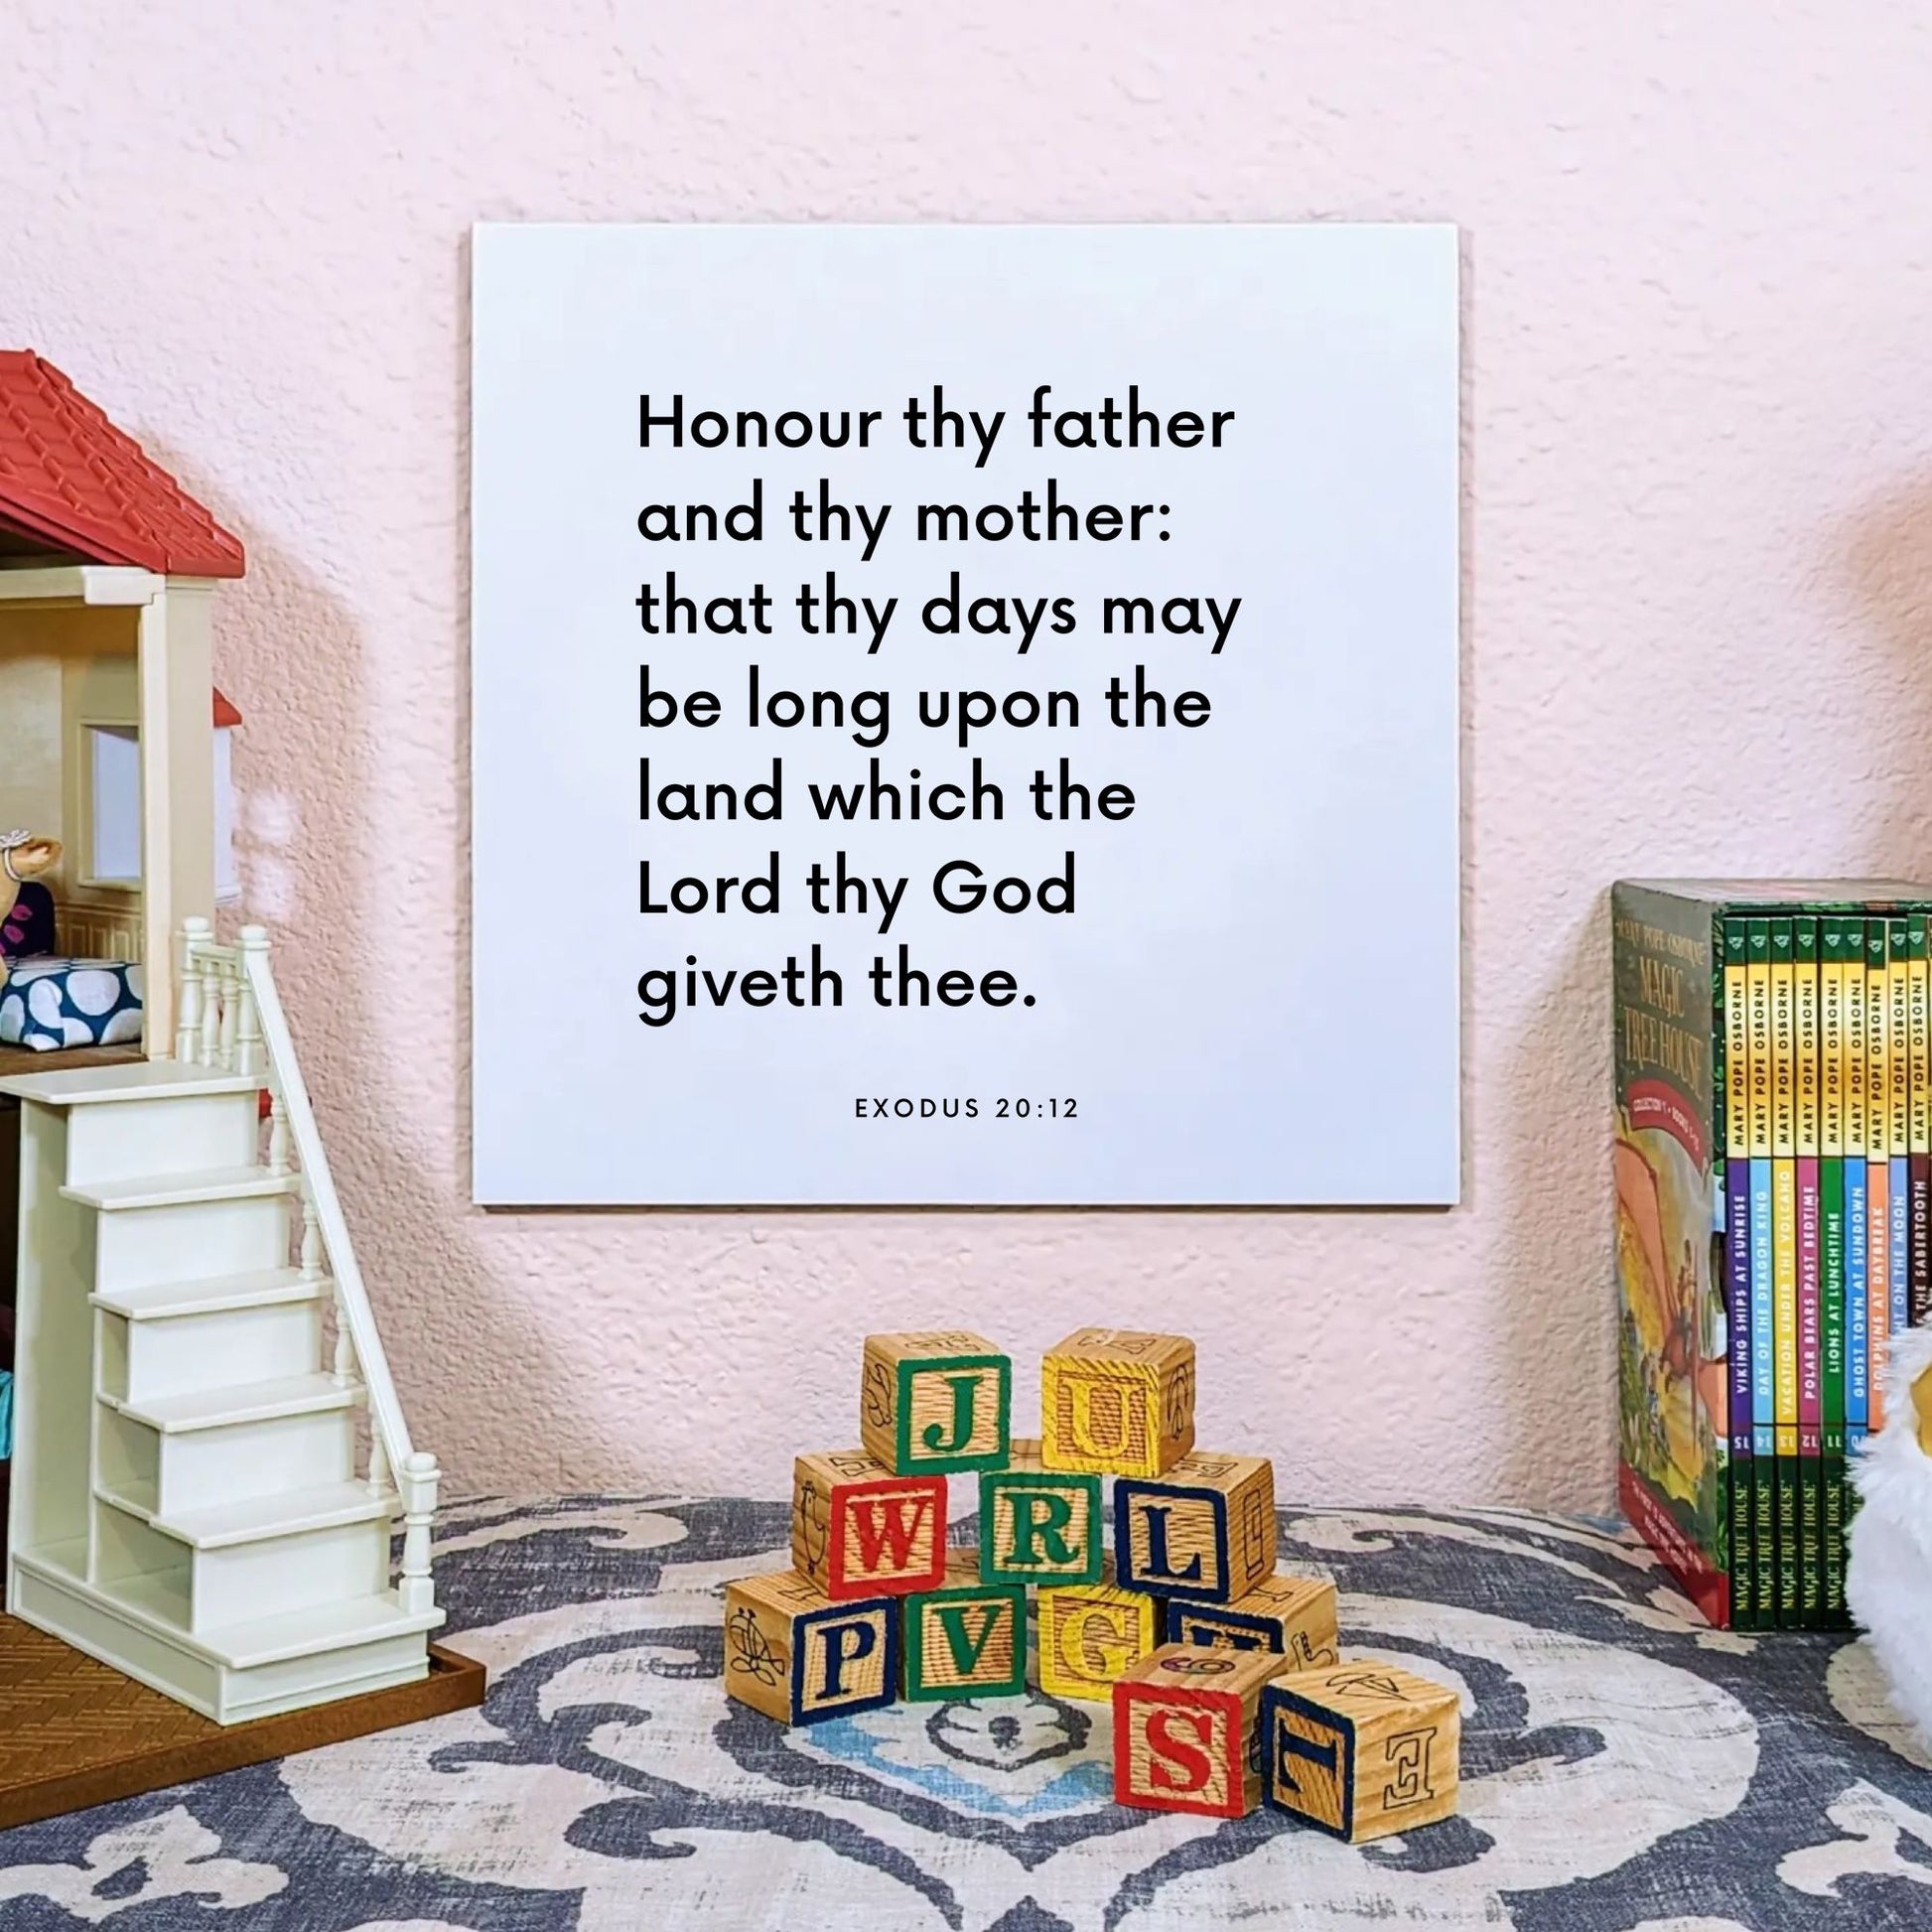 Playroom mouting of the scripture tile for Exodus 20:12 - "Honour thy father and thy mother"